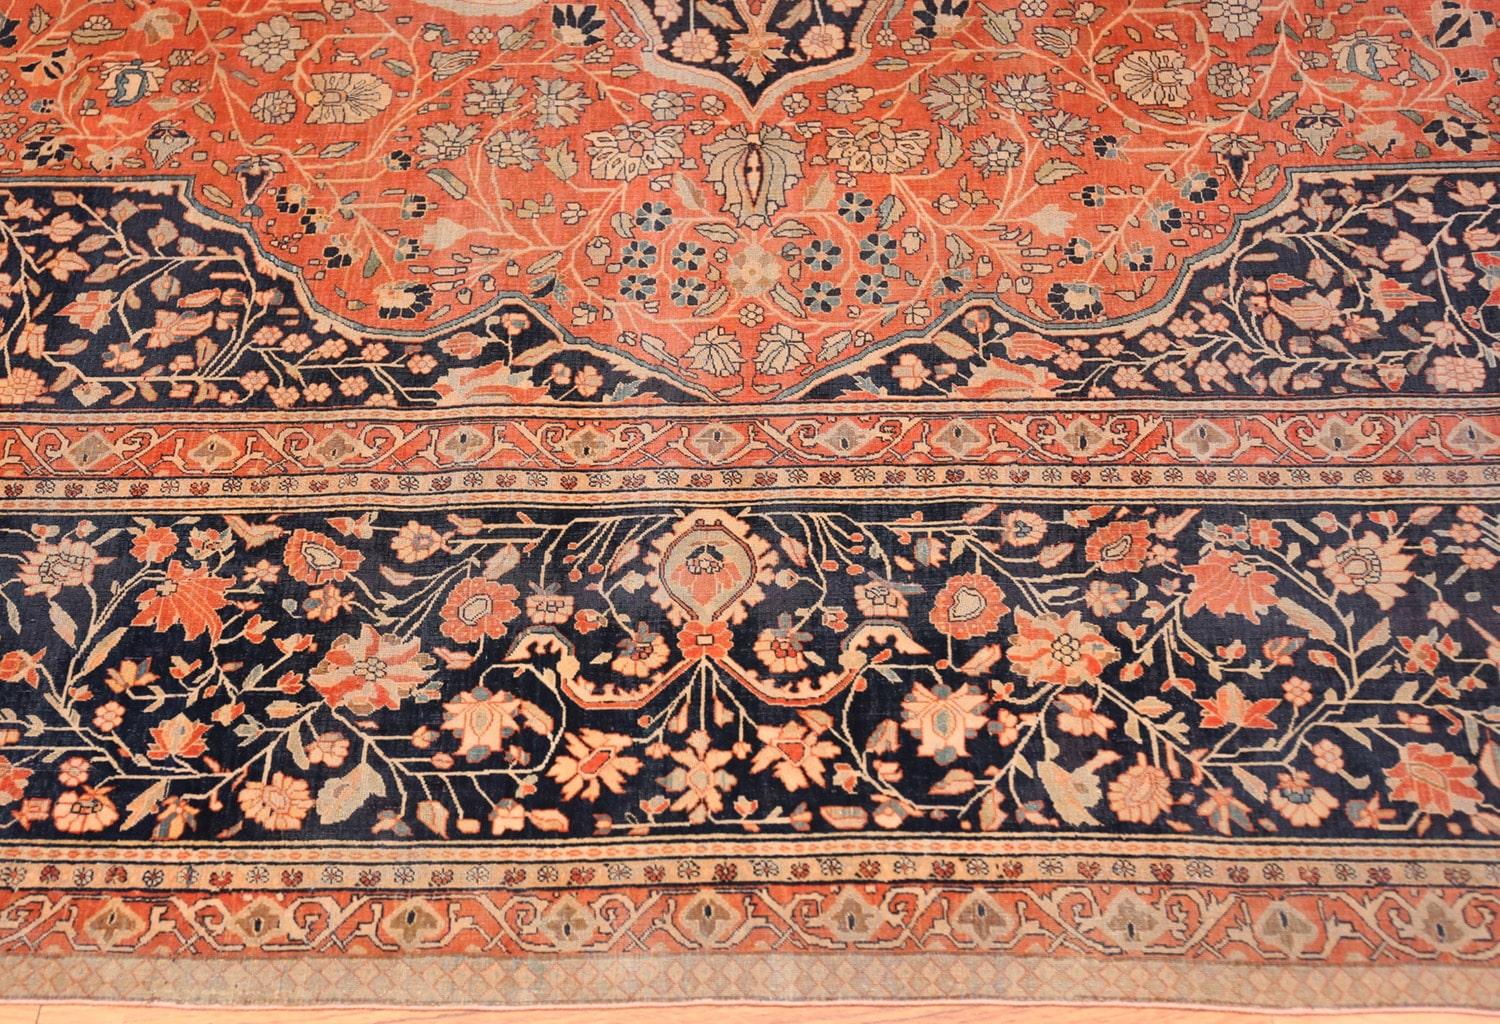 Beautiful and finely woven antique Persian Mohtashem Kashan rug, country of origin: Persia, date circa late 19th century. Size: 10 ft 8 in x 14 ft 6 in (3.25 m x 4.42 m)

Attributed to Kashan’s elusive Mohtashem atelier, this inscribed antique